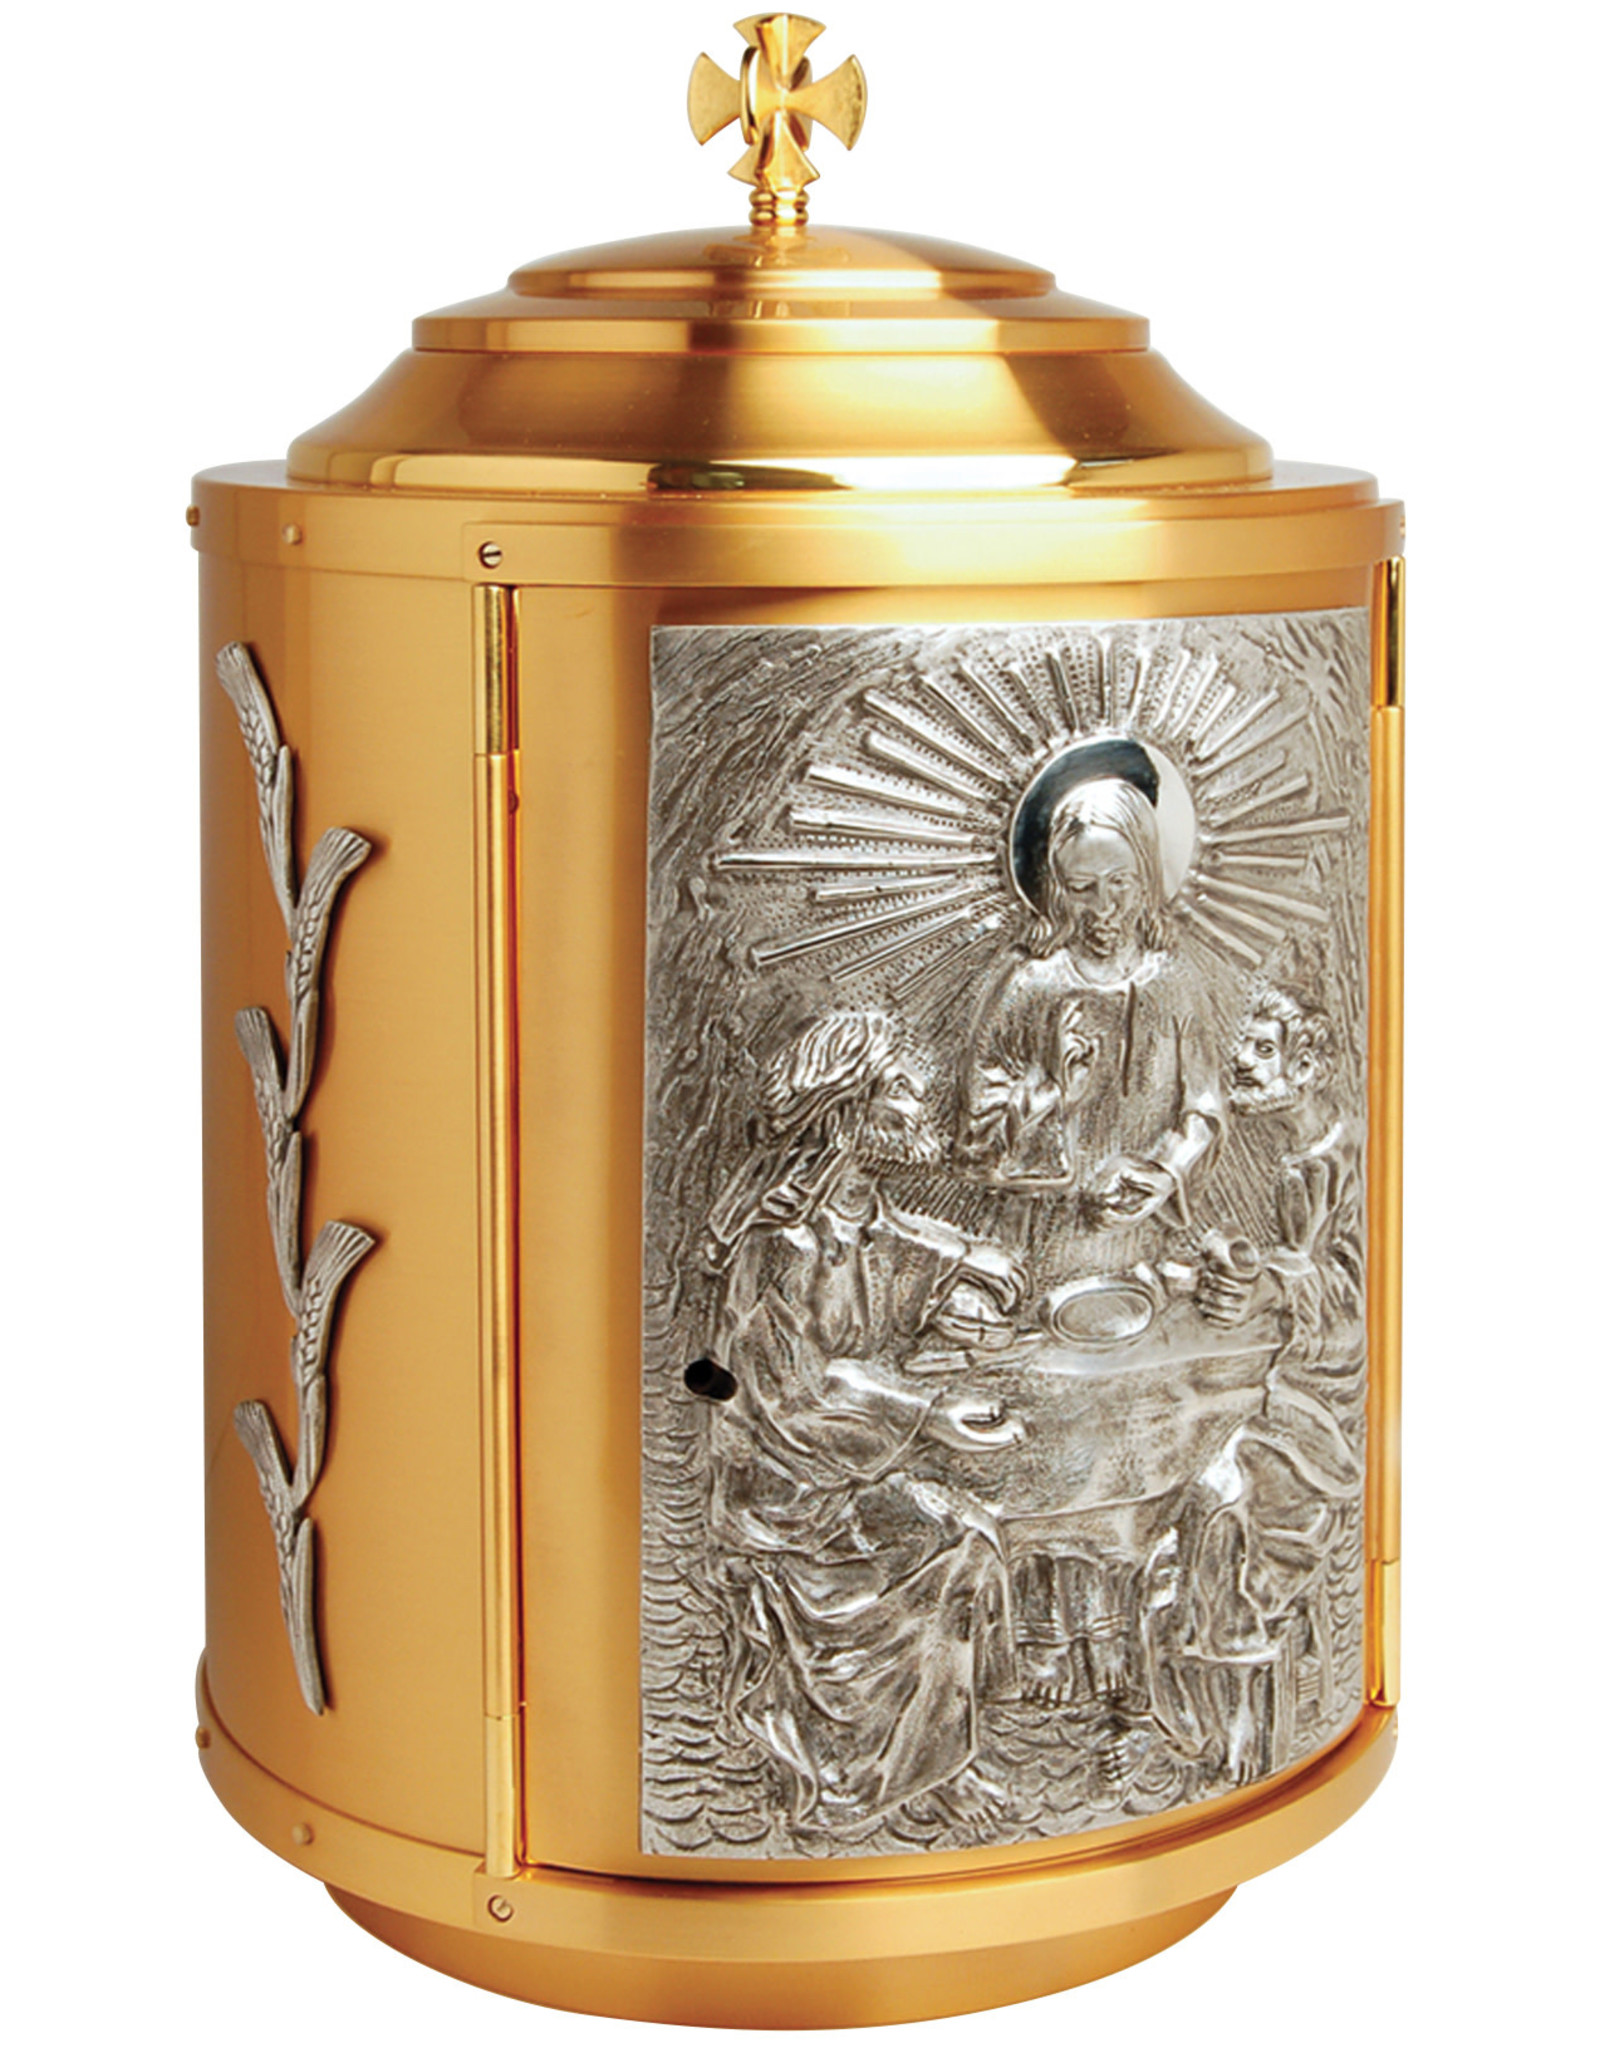 Tabernacle Gold Plated with Silver Plated Accents